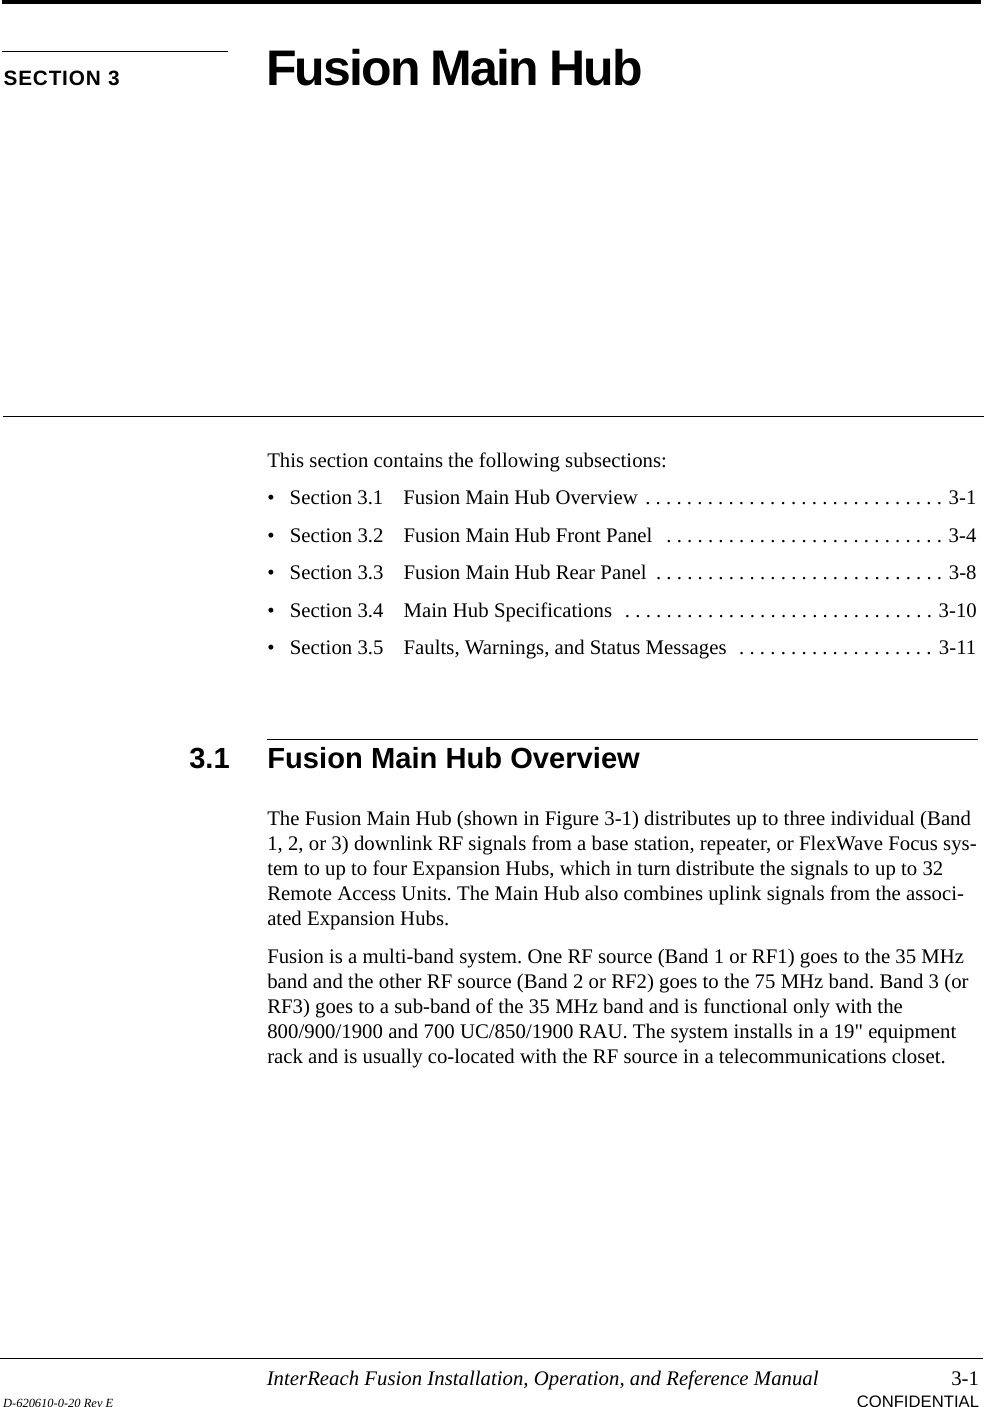 InterReach Fusion Installation, Operation, and Reference Manual 3-1D-620610-0-20 Rev E CONFIDENTIALSECTION 3 Fusion Main HubThis section contains the following subsections:• Section 3.1   Fusion Main Hub Overview . . . . . . . . . . . . . . . . . . . . . . . . . . . . . 3-1• Section 3.2   Fusion Main Hub Front Panel   . . . . . . . . . . . . . . . . . . . . . . . . . . . 3-4• Section 3.3   Fusion Main Hub Rear Panel  . . . . . . . . . . . . . . . . . . . . . . . . . . . . 3-8• Section 3.4   Main Hub Specifications  . . . . . . . . . . . . . . . . . . . . . . . . . . . . . . 3-10• Section 3.5   Faults, Warnings, and Status Messages  . . . . . . . . . . . . . . . . . . . 3-113.1 Fusion Main Hub OverviewThe Fusion Main Hub (shown in Figure 3-1) distributes up to three individual (Band 1, 2, or 3) downlink RF signals from a base station, repeater, or FlexWave Focus sys-tem to up to four Expansion Hubs, which in turn distribute the signals to up to 32 Remote Access Units. The Main Hub also combines uplink signals from the associ-ated Expansion Hubs.Fusion is a multi-band system. One RF source (Band 1 or RF1) goes to the 35 MHz band and the other RF source (Band 2 or RF2) goes to the 75 MHz band. Band 3 (or RF3) goes to a sub-band of the 35 MHz band and is functional only with the 800/900/1900 and 700 UC/850/1900 RAU. The system installs in a 19&quot; equipment rack and is usually co-located with the RF source in a telecommunications closet.